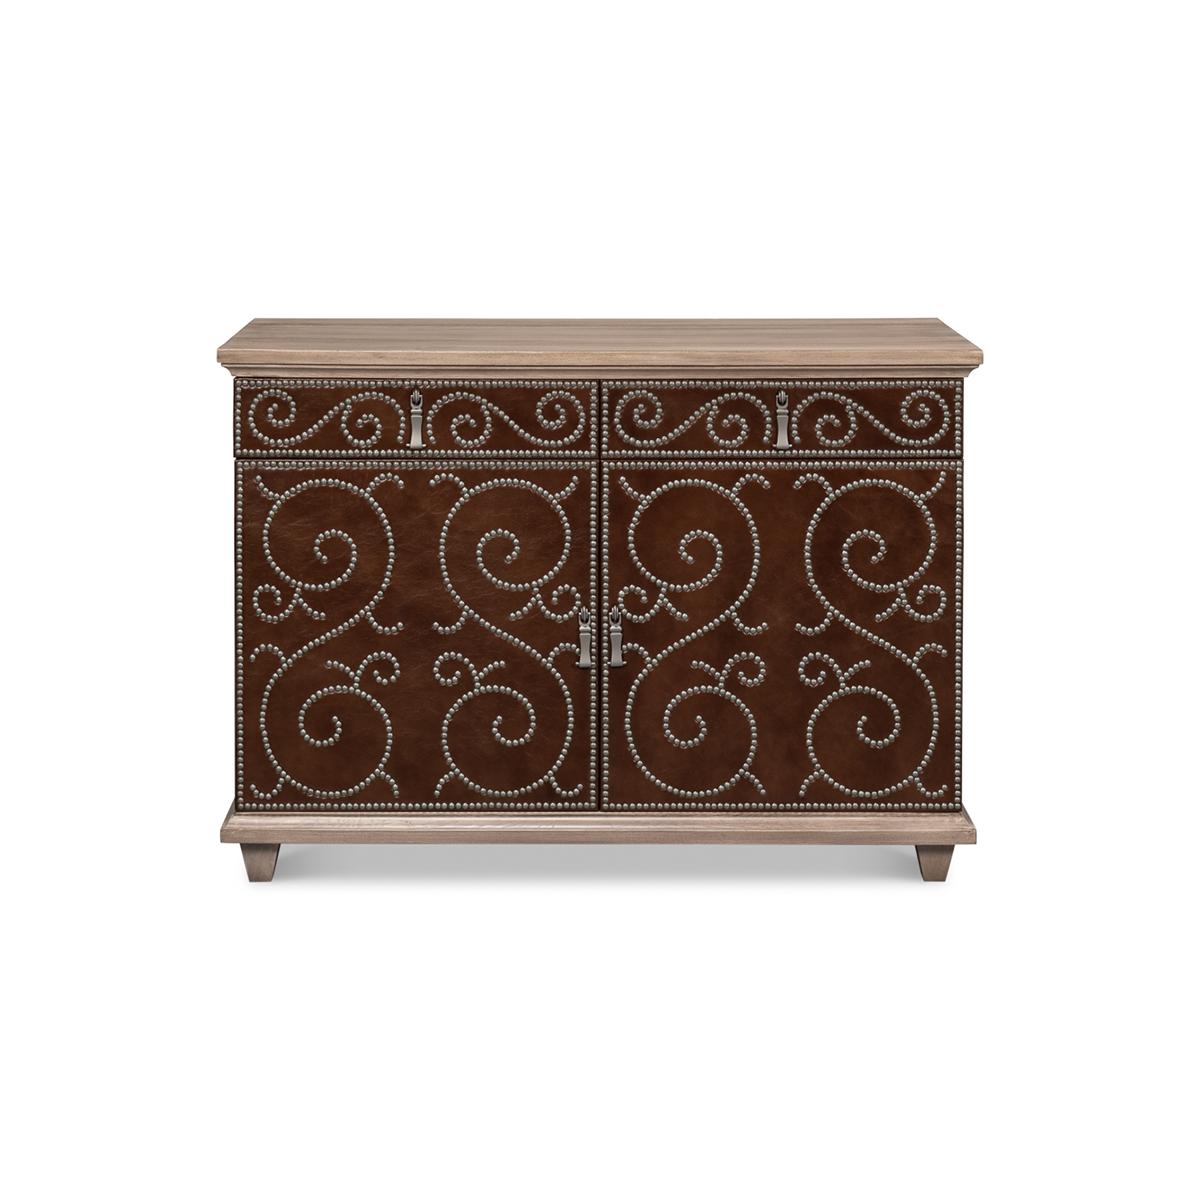 A classic equestrian-inspired brown leather-wrapped cabinet. This two-drawer and two-door cabinet has a refined design with hand-hammered nailhead accents. The top and base are finished in a barn grey wood finish.

Dimensions: 48